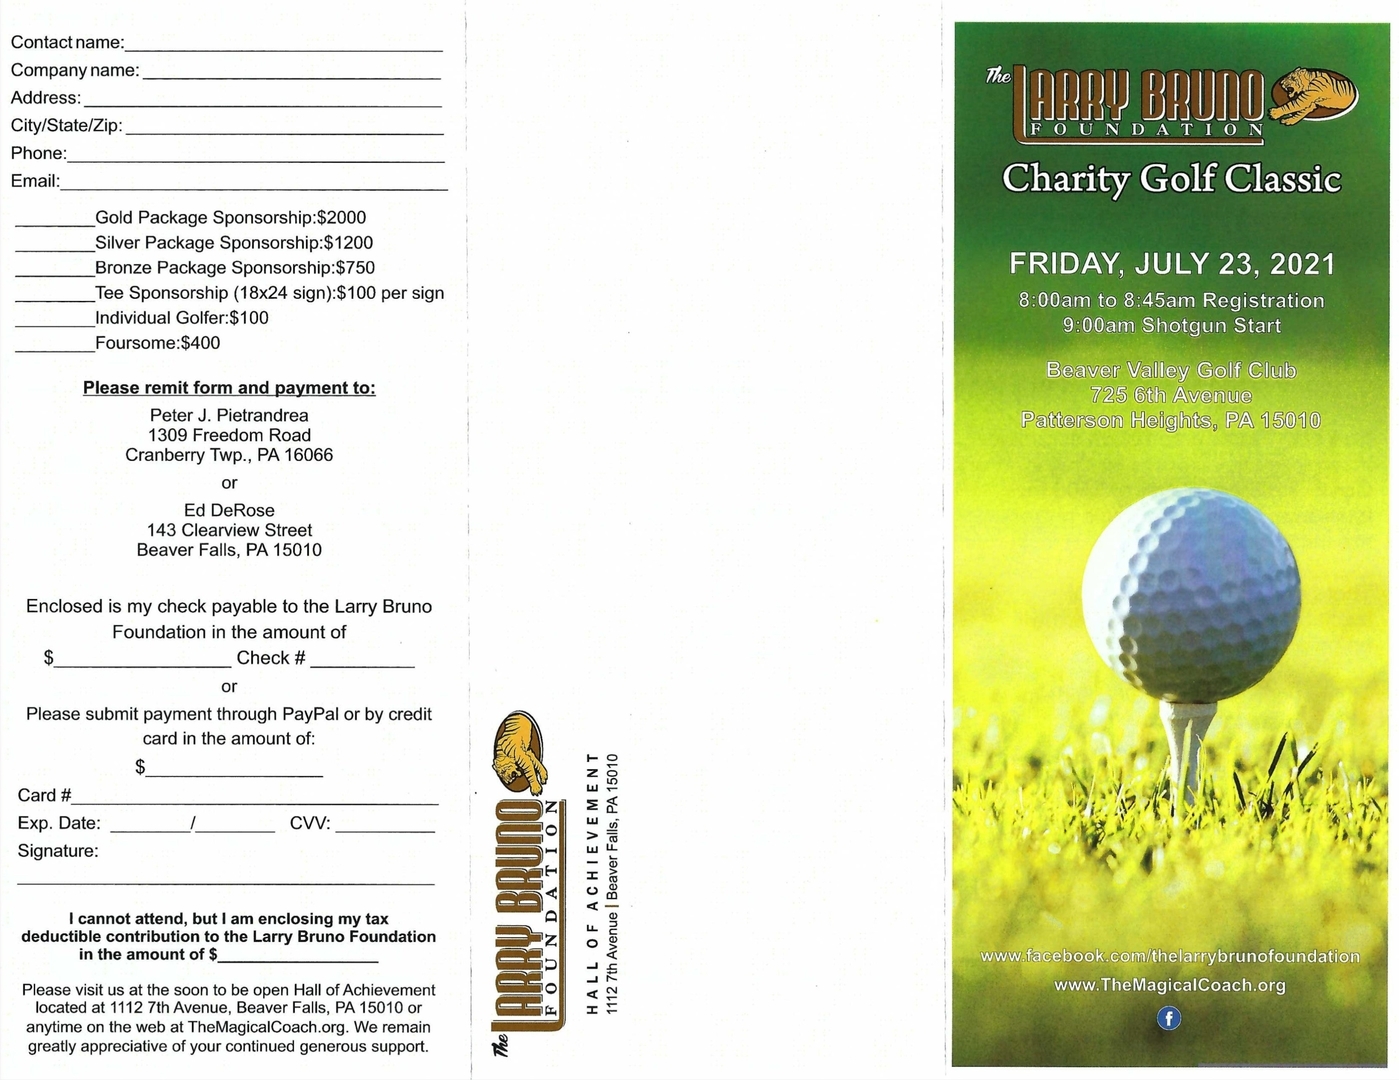 Larry Bruno Charity Golf Classic to be held on Friday, July 23rd with a shotgun start at 9:00 a.m., Patterson Heights, Pennsylvania, United States